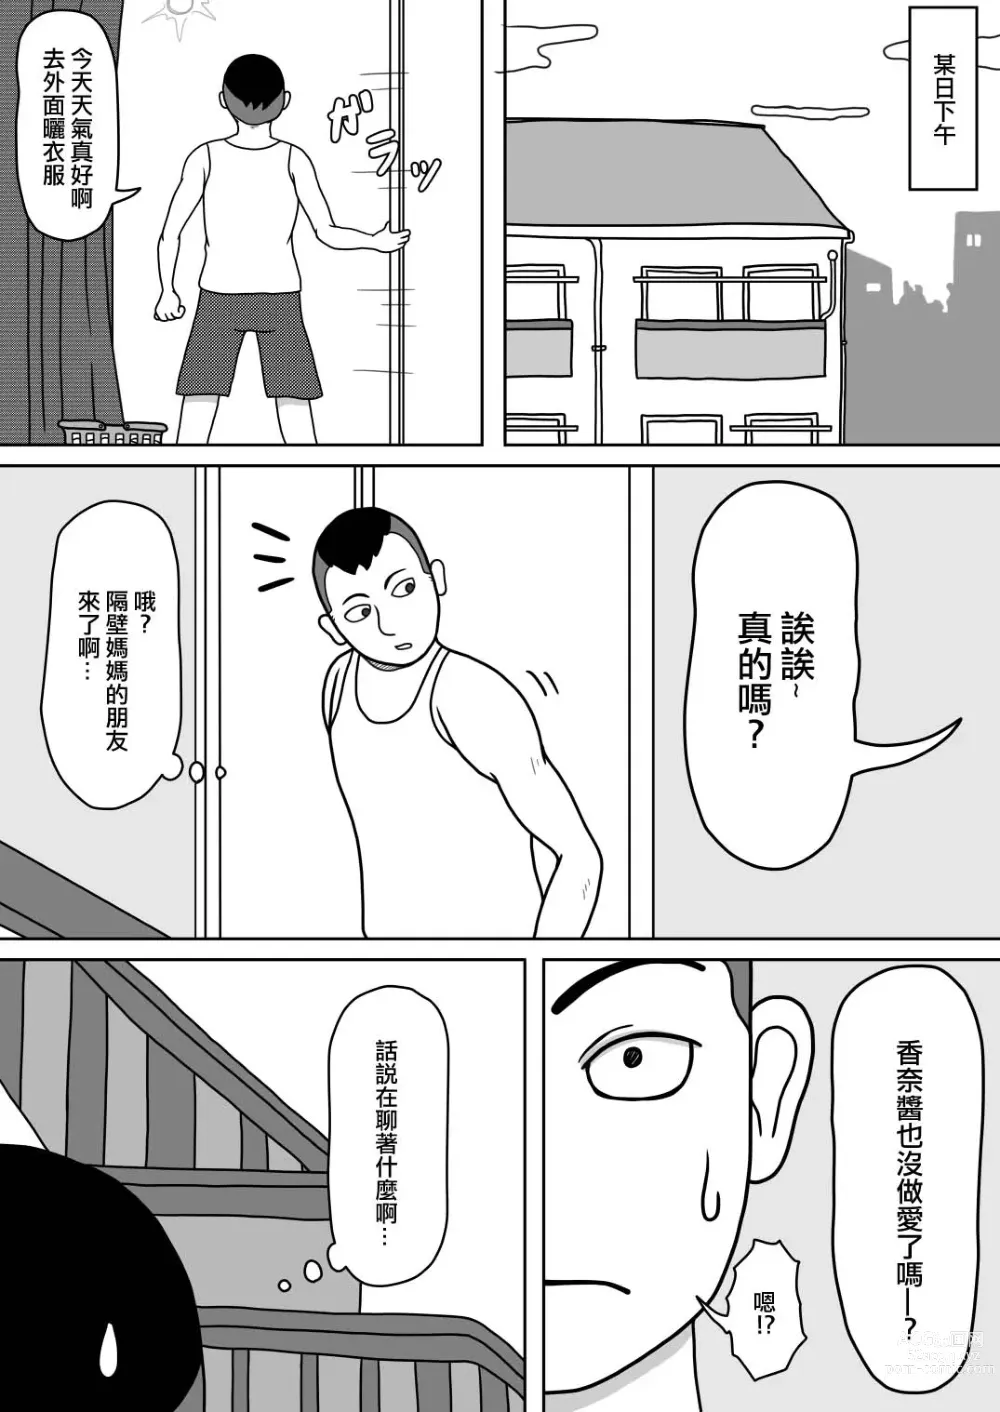 Page 4 of doujinshi 201號房的鄰居